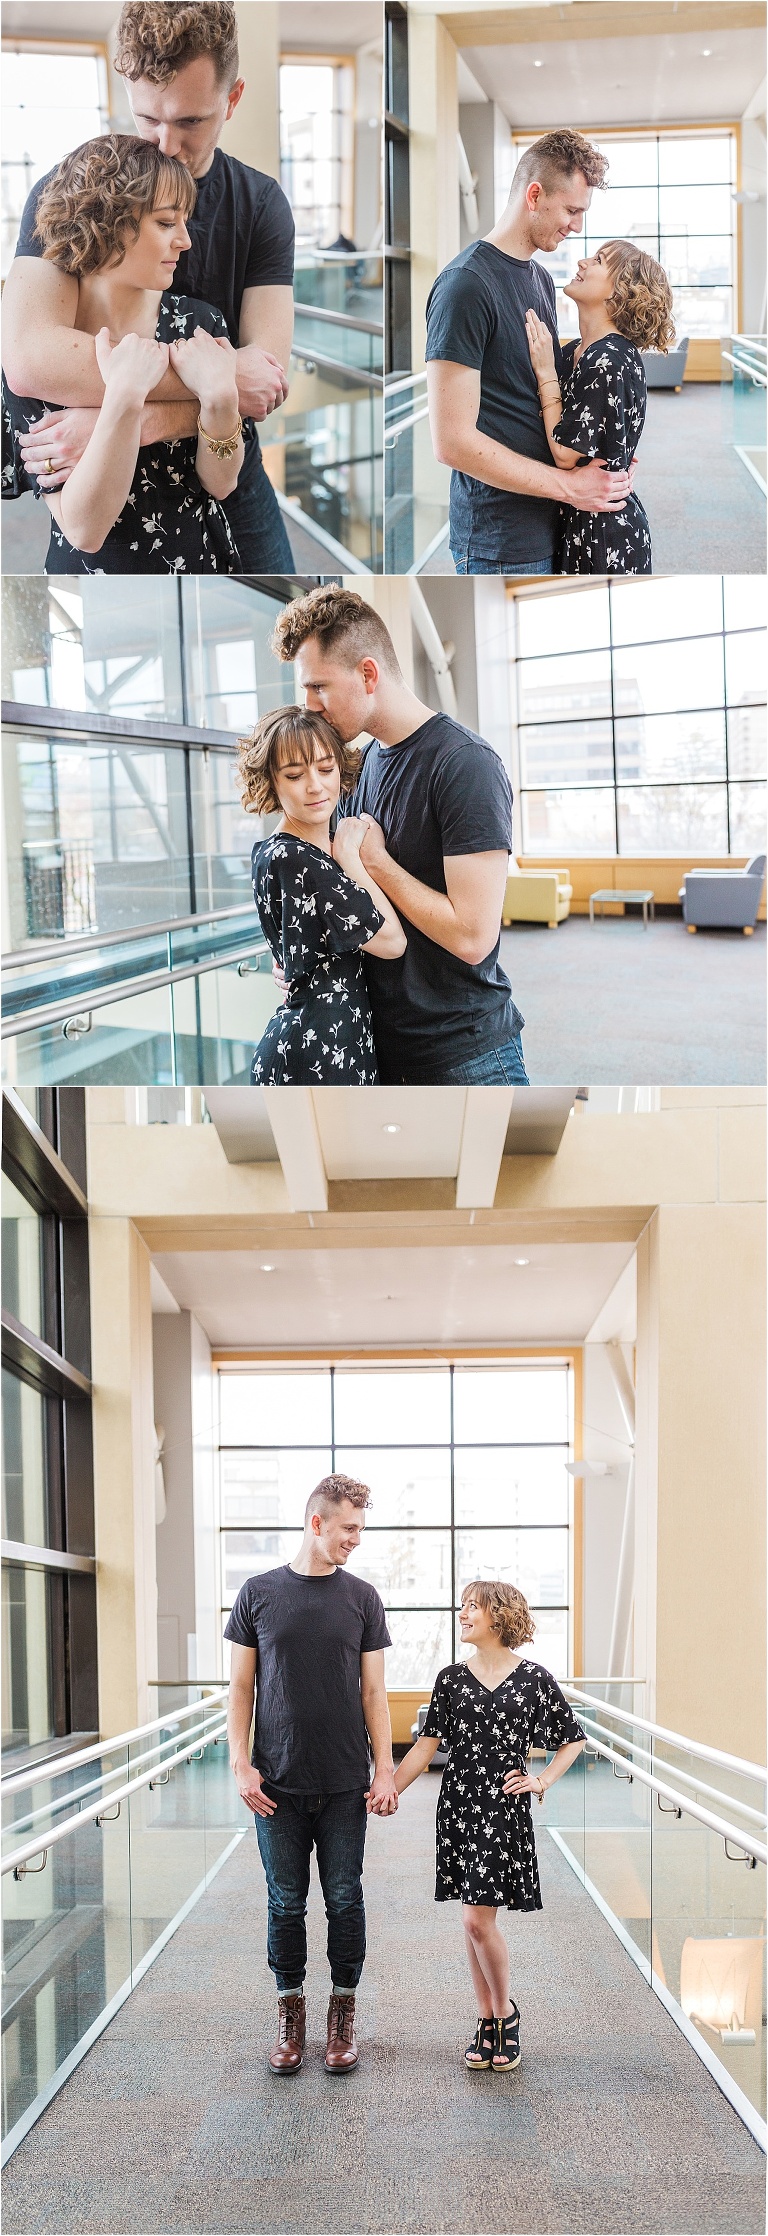 A couple in a modern building with lots of leading lines, sunlight, and architectural elements. The couples is hugging, touching arms, and showing off their love.